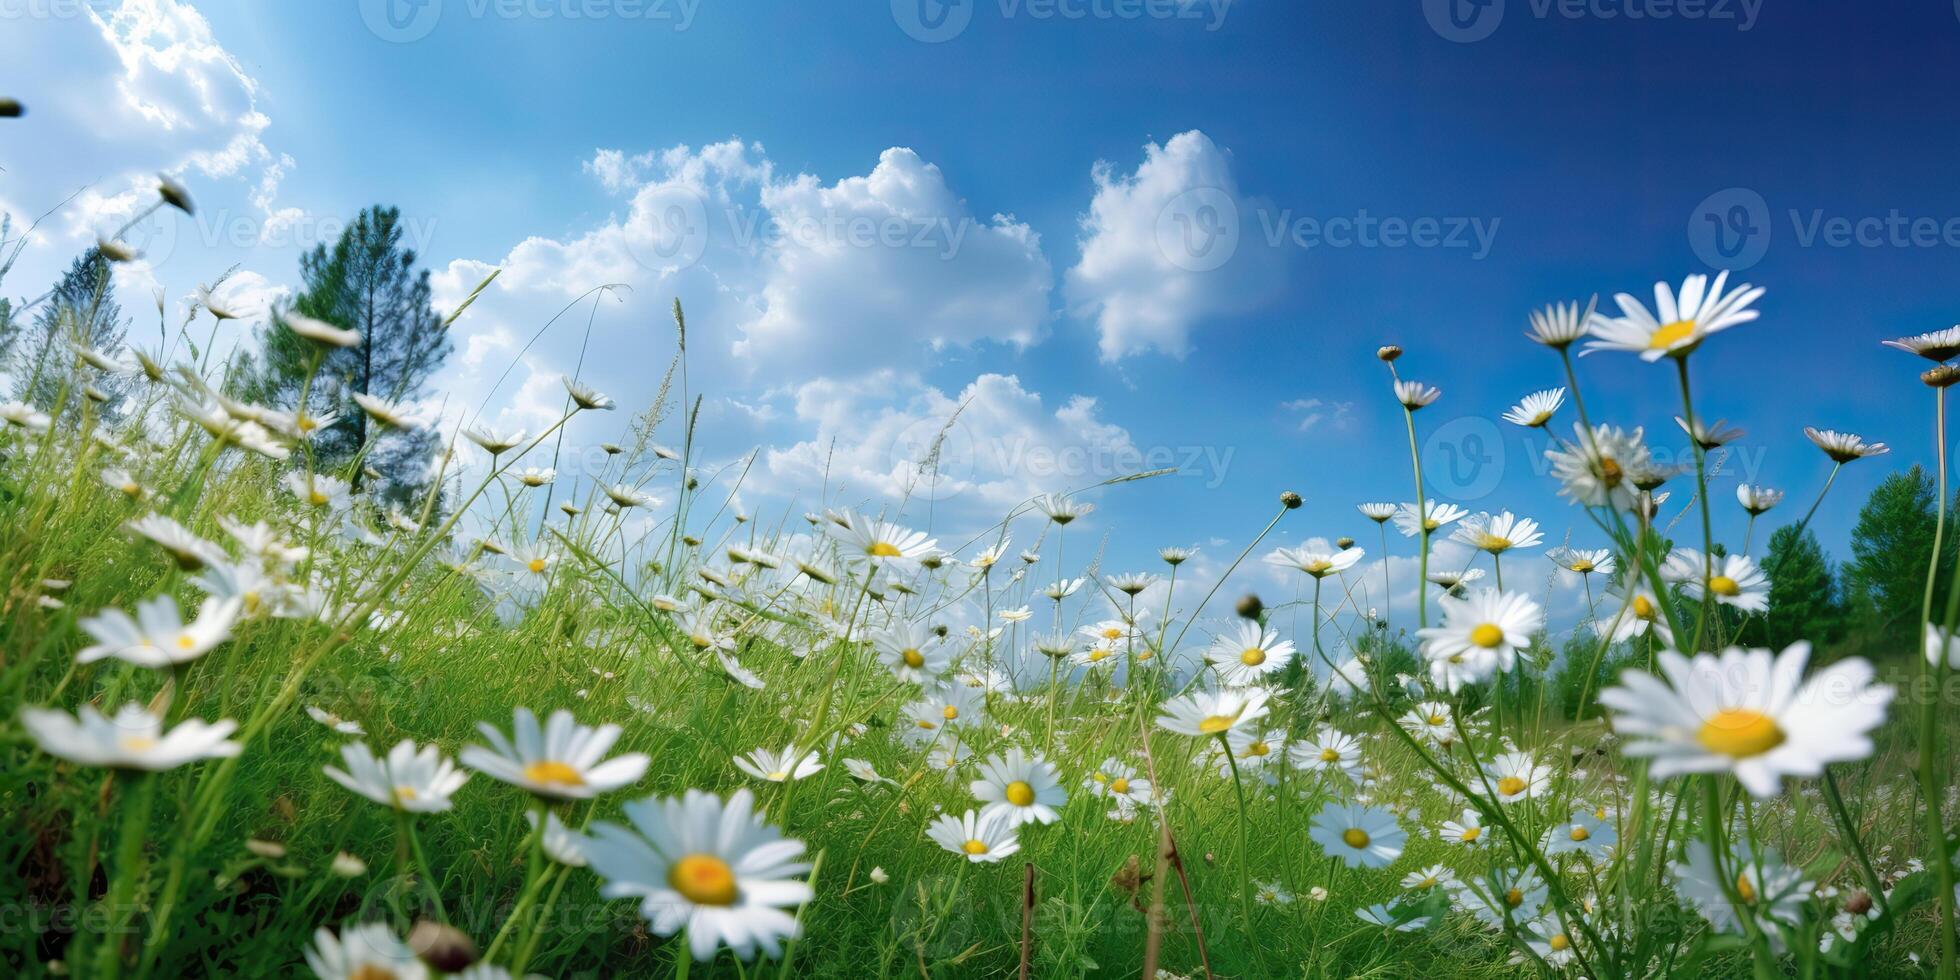 . . Wild daisies in the grass with a blue sky photo realistic illustration. Romantic